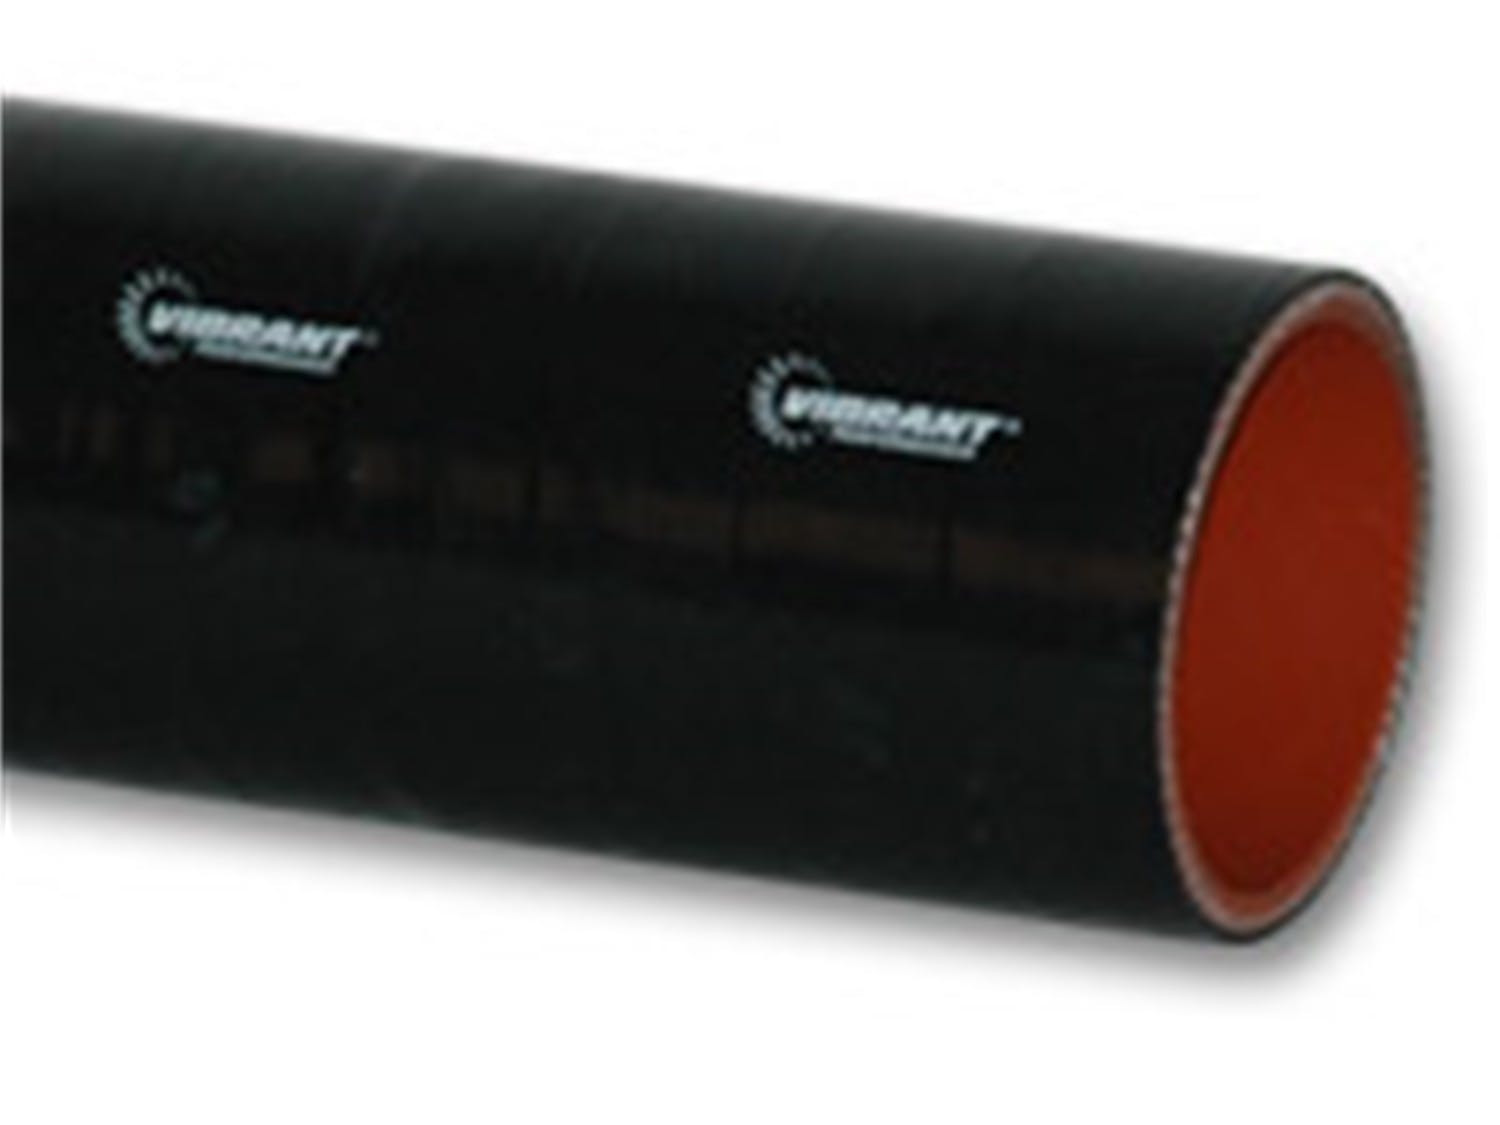 Vibrant Performance 2711 4 Ply Silicone Sleeve, 2.5 inch I.D. x 36 inch Long - Black